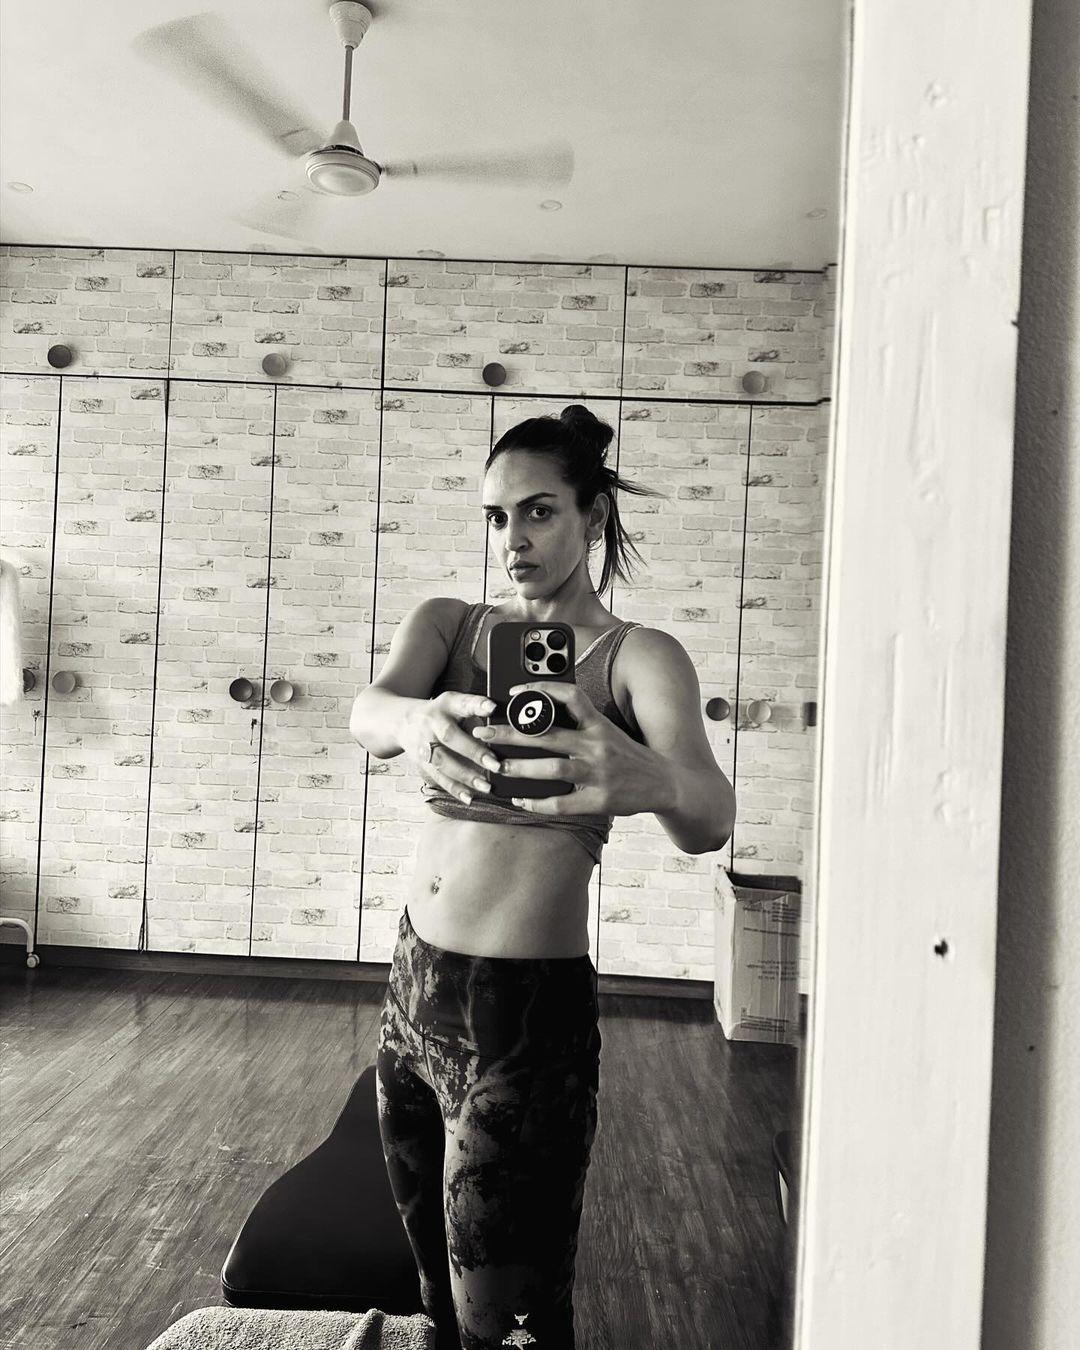 Actress Esha Deol seems to have been focusing on fitness lately, sharing glimpses of her workout sessions with her fans on social media